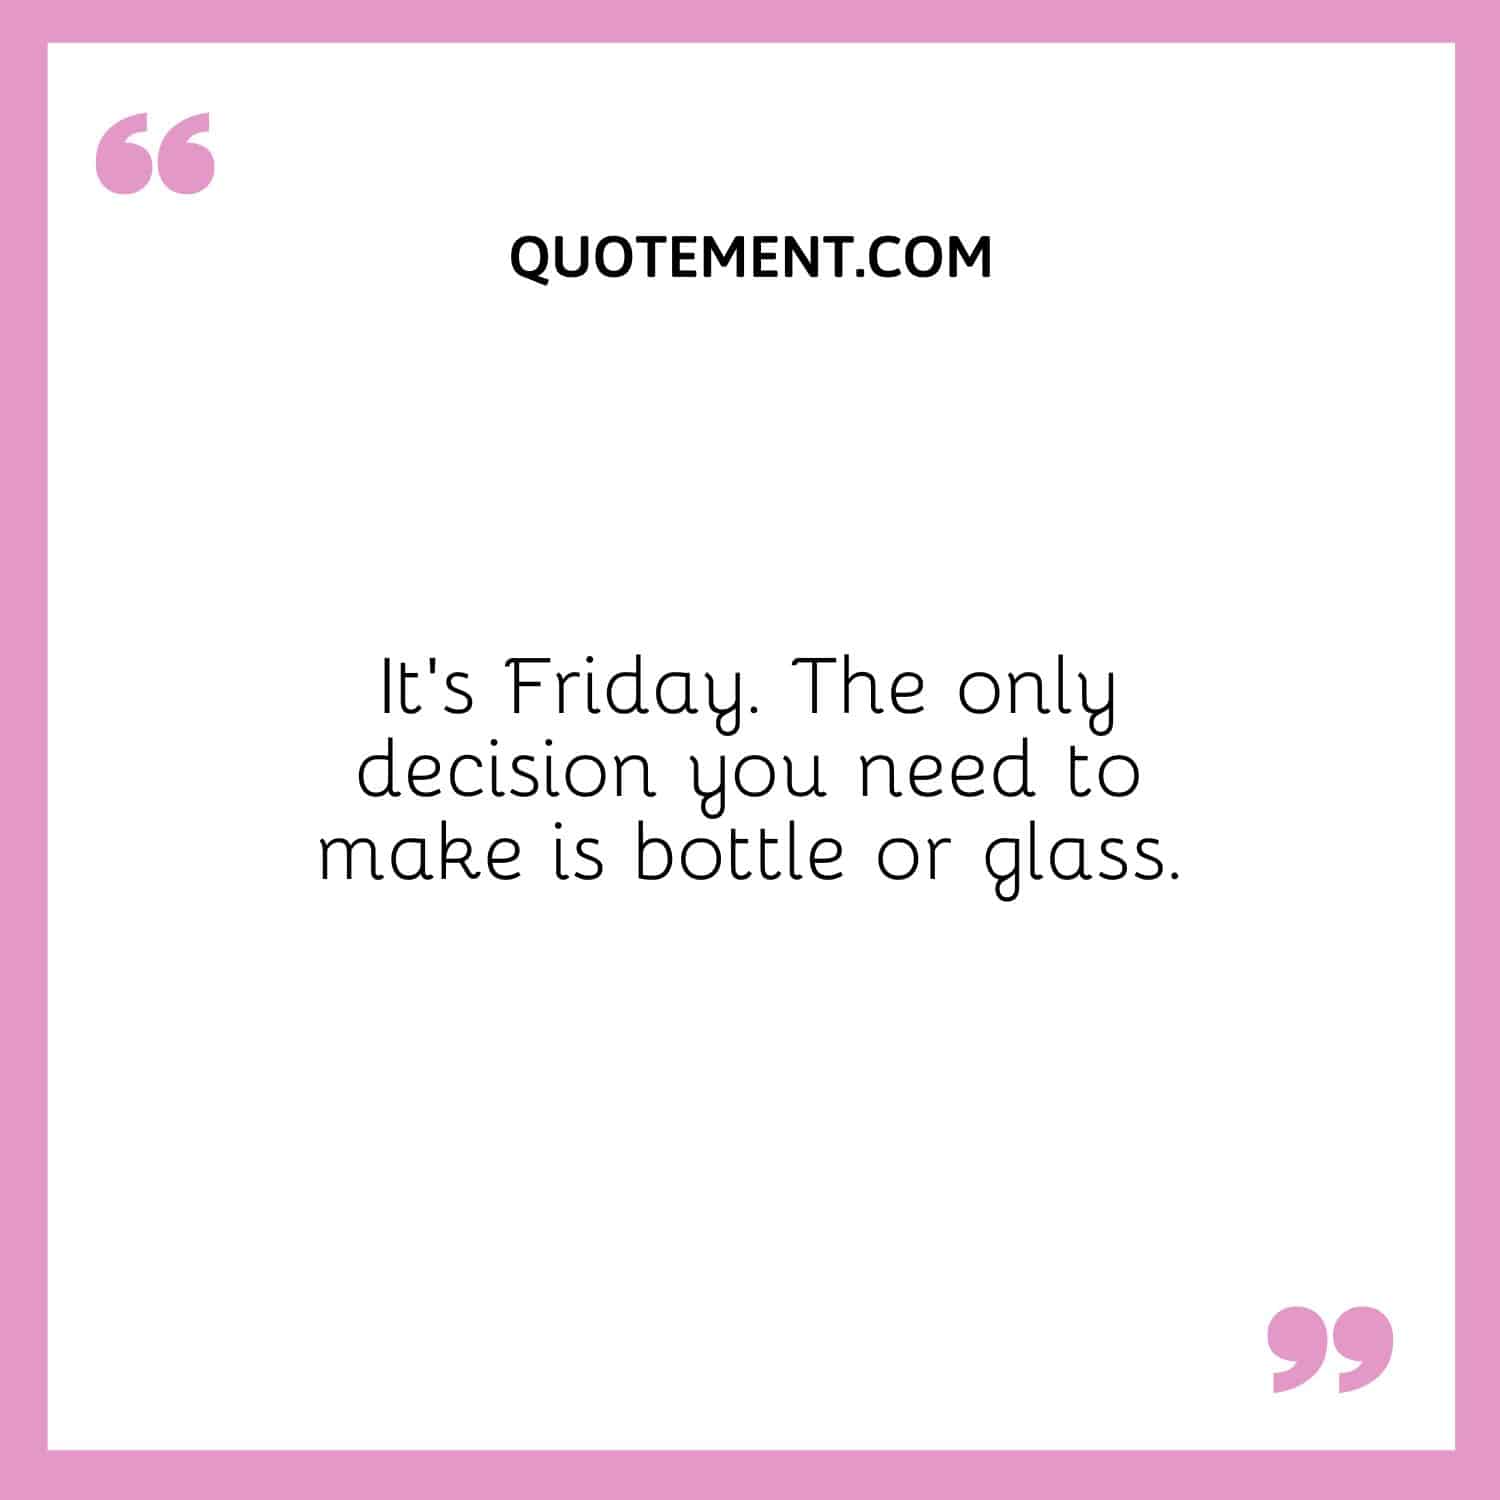 The only decision you need to make is bottle or glass